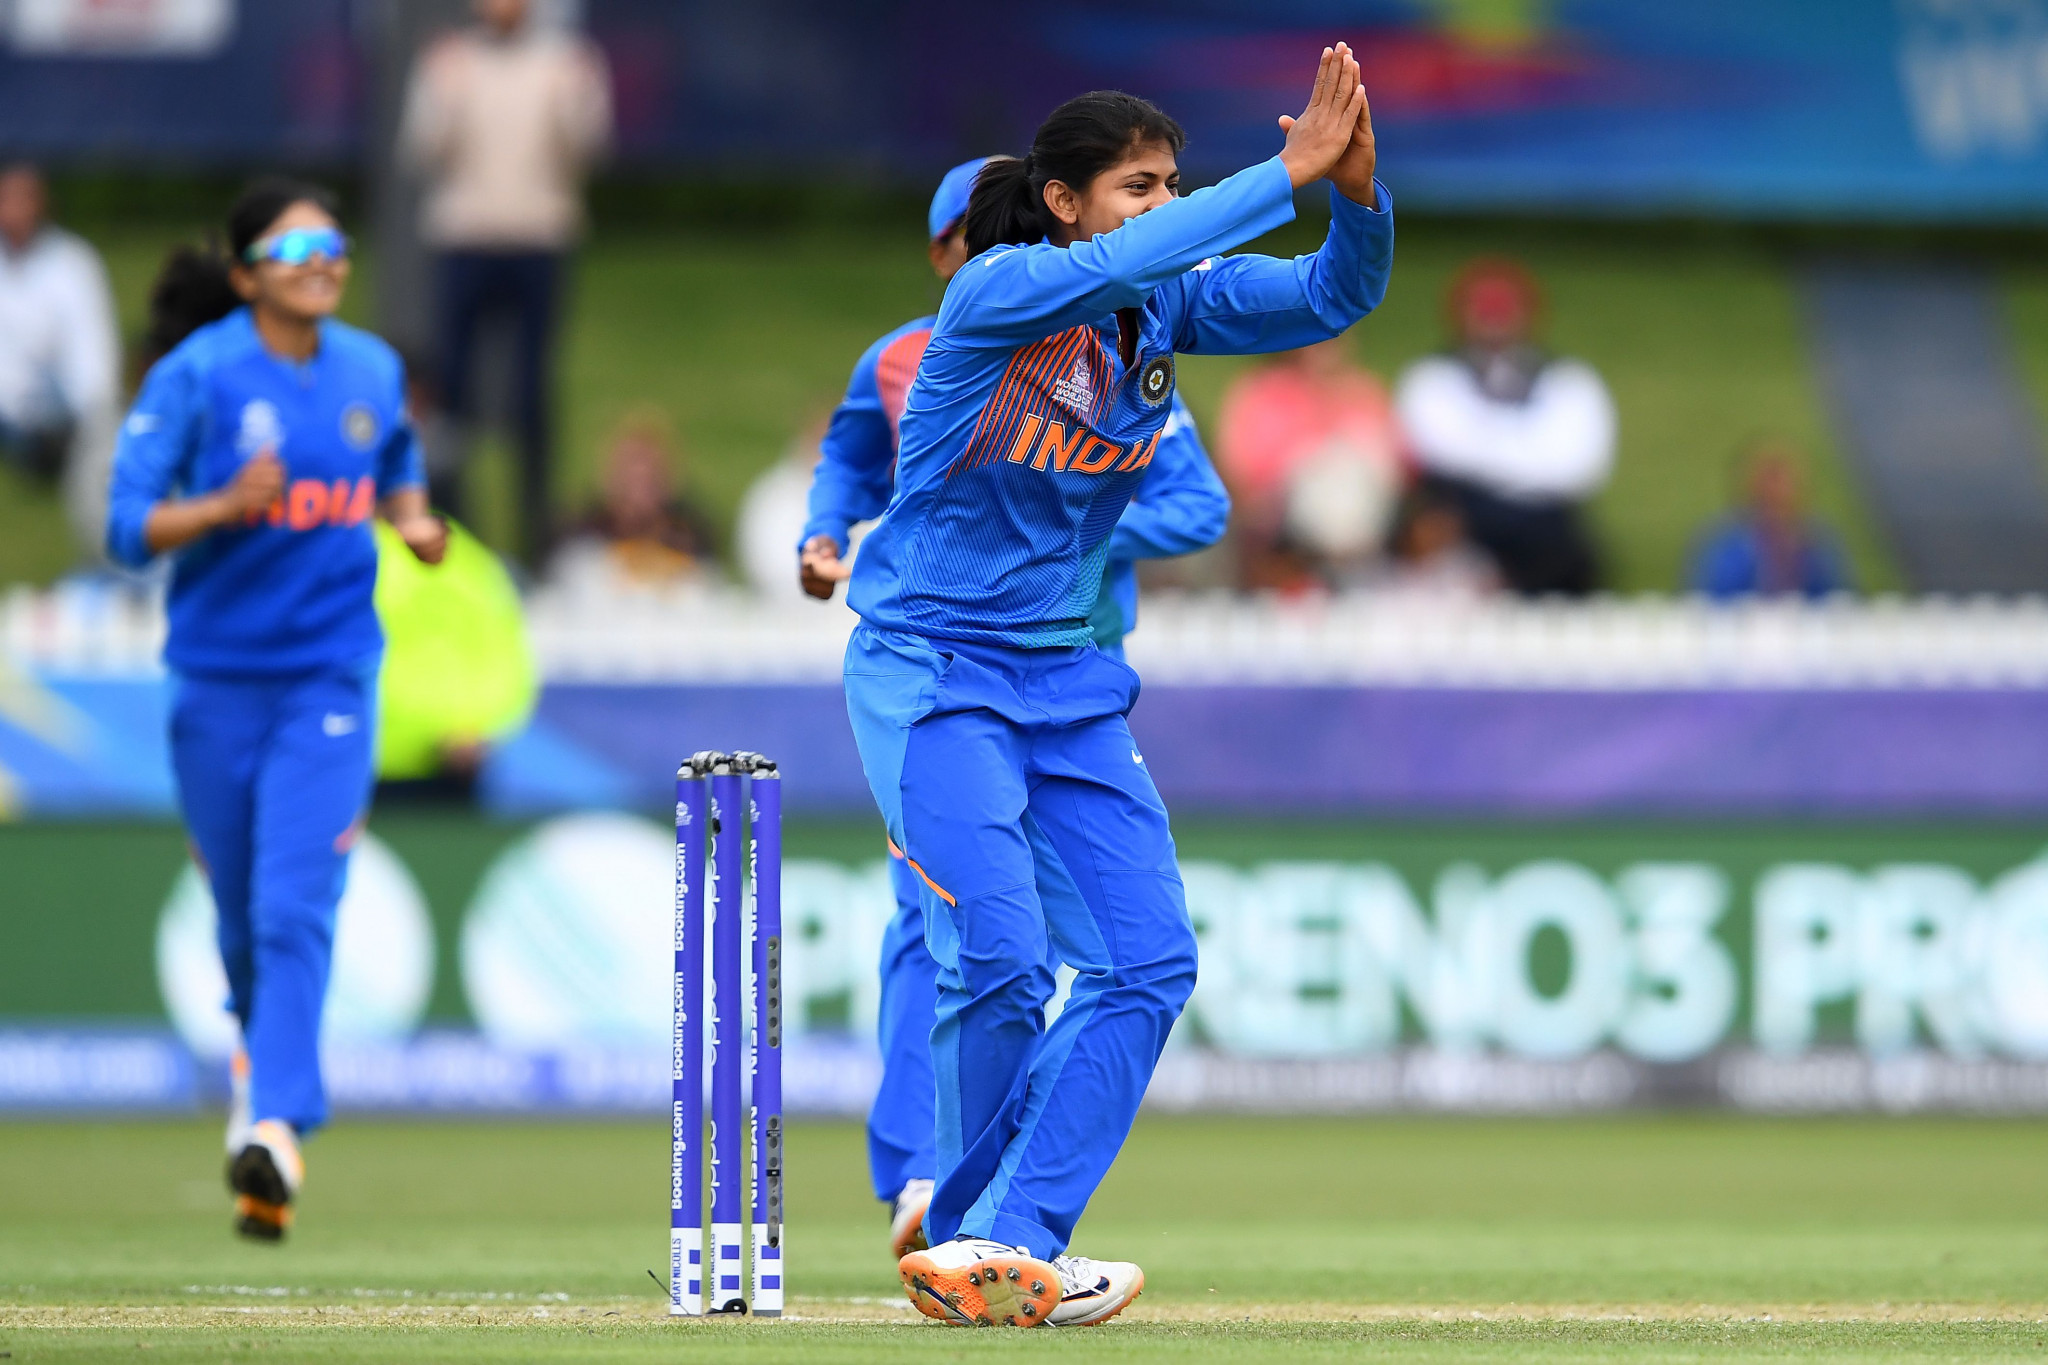 India beat New Zealand to qualify for Women's T20 World Cup semi-finals